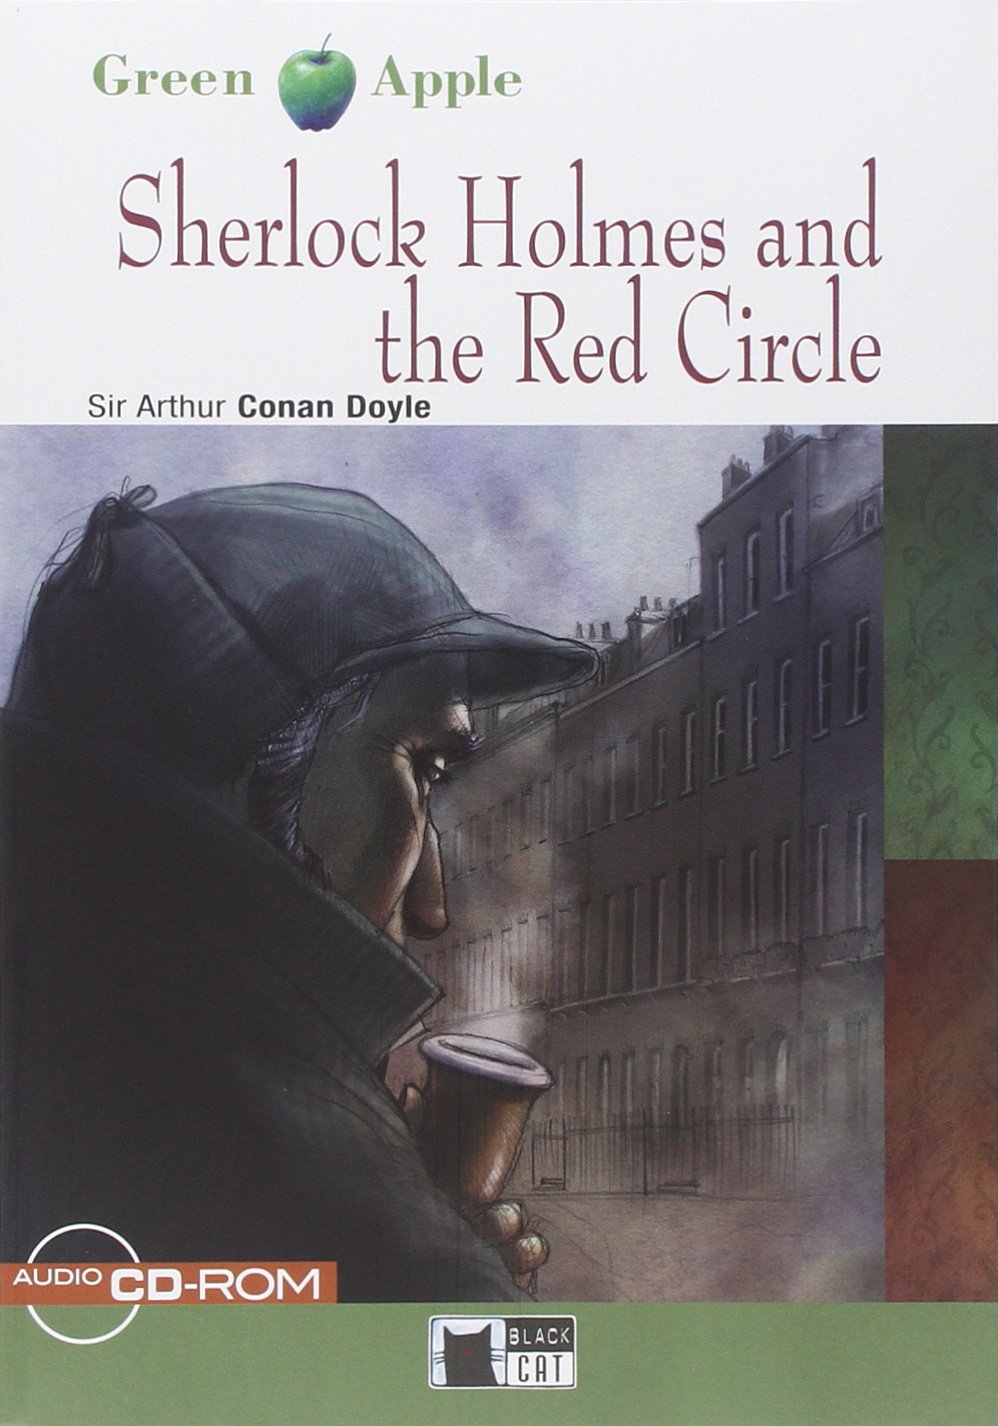 Sherlock Holmes and The Red Circle + Audio CD-ROM